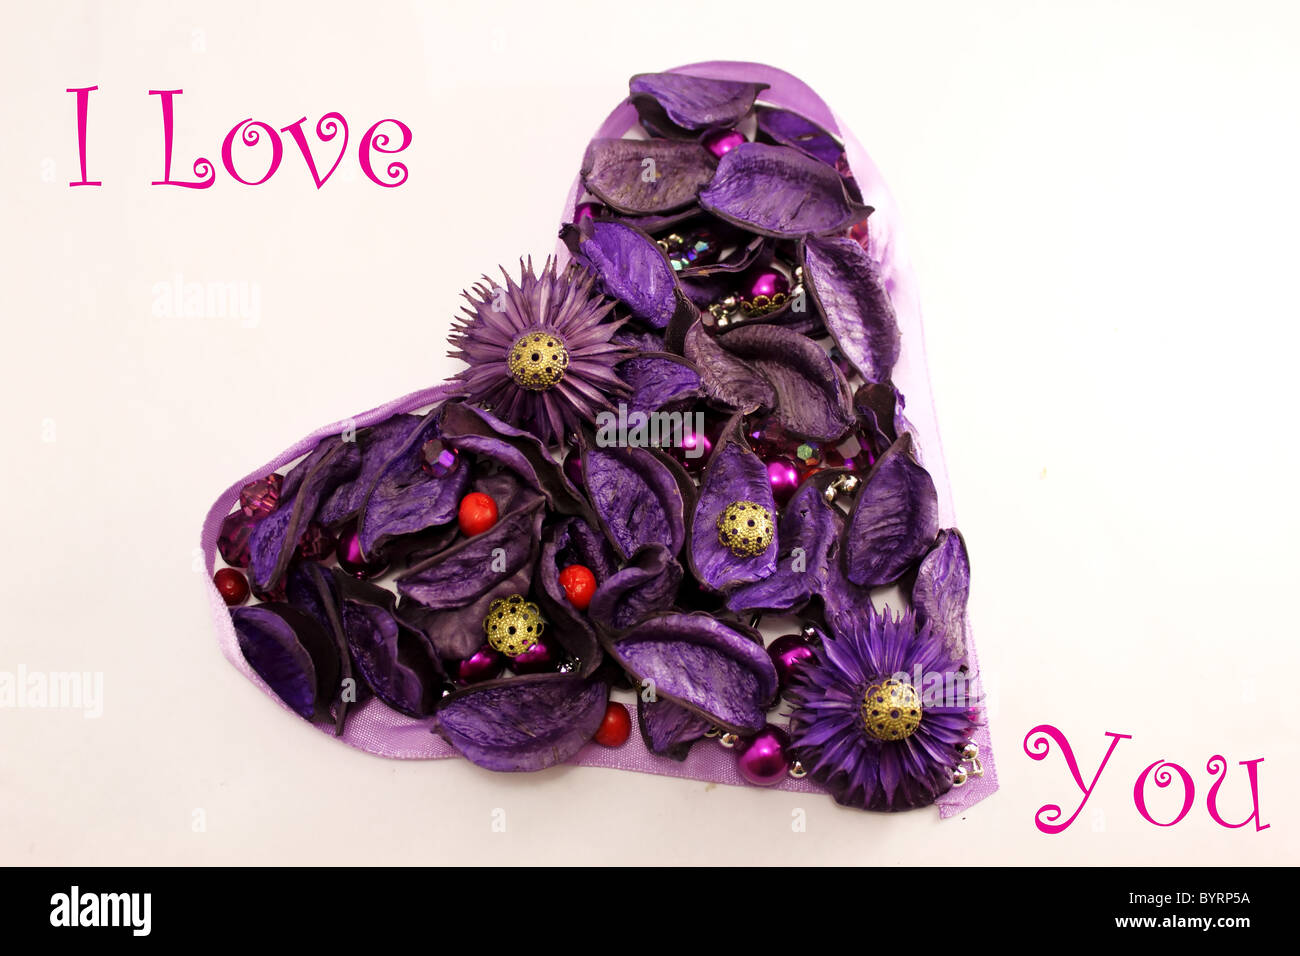 Greeting Valentine card with violet flowers and beads. Stock Photo